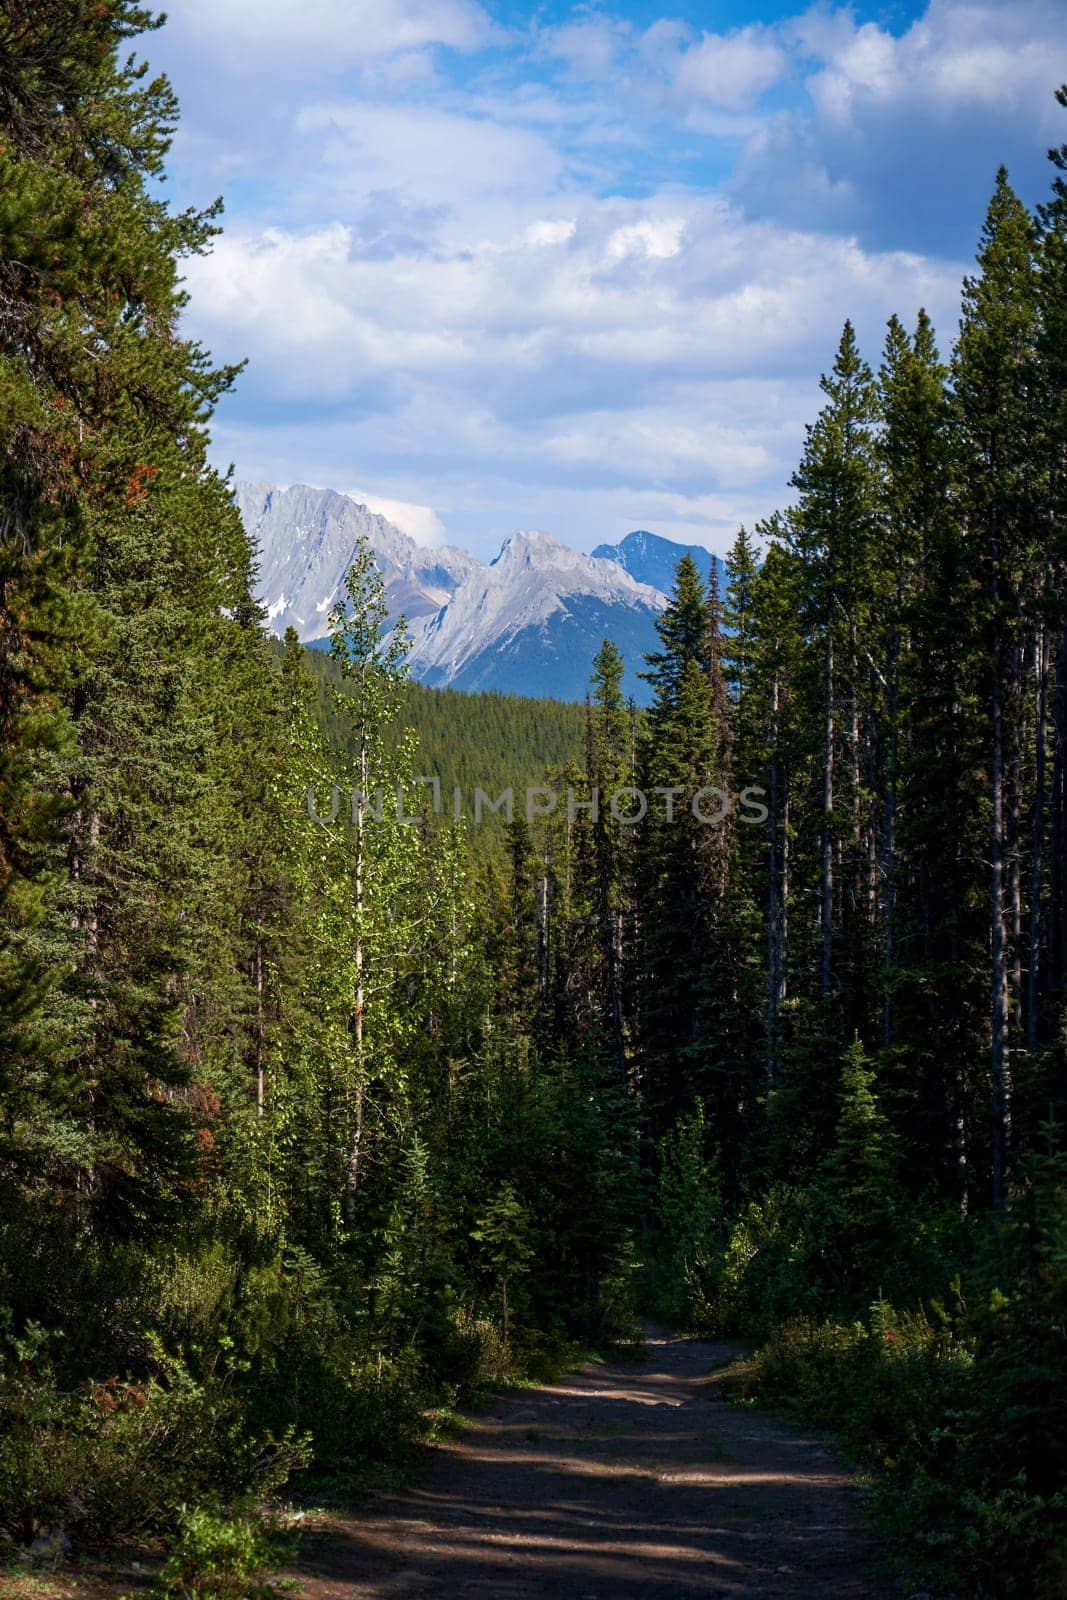 The rocky mountains of Alberta are surrounded by coniferous forests on a sunny summer day